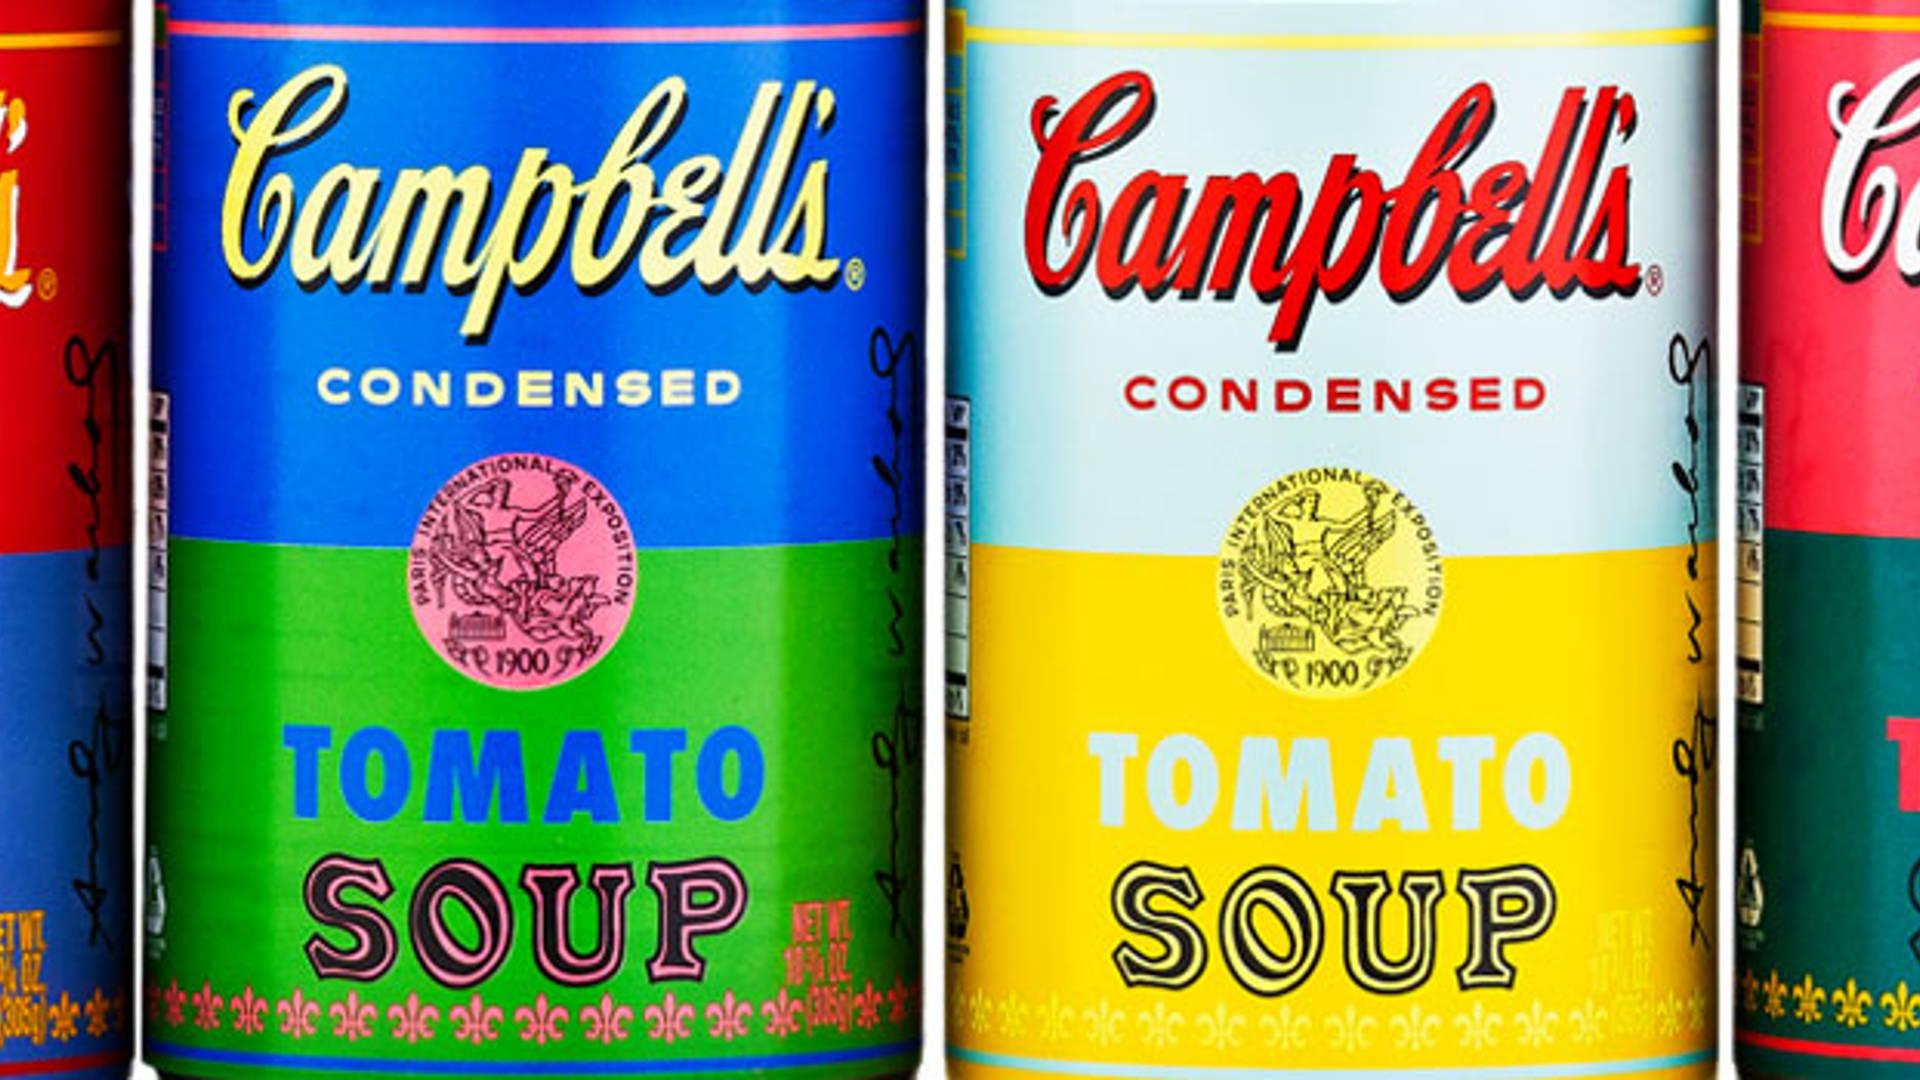 Campbell's Limited Edition: Andy Warhol